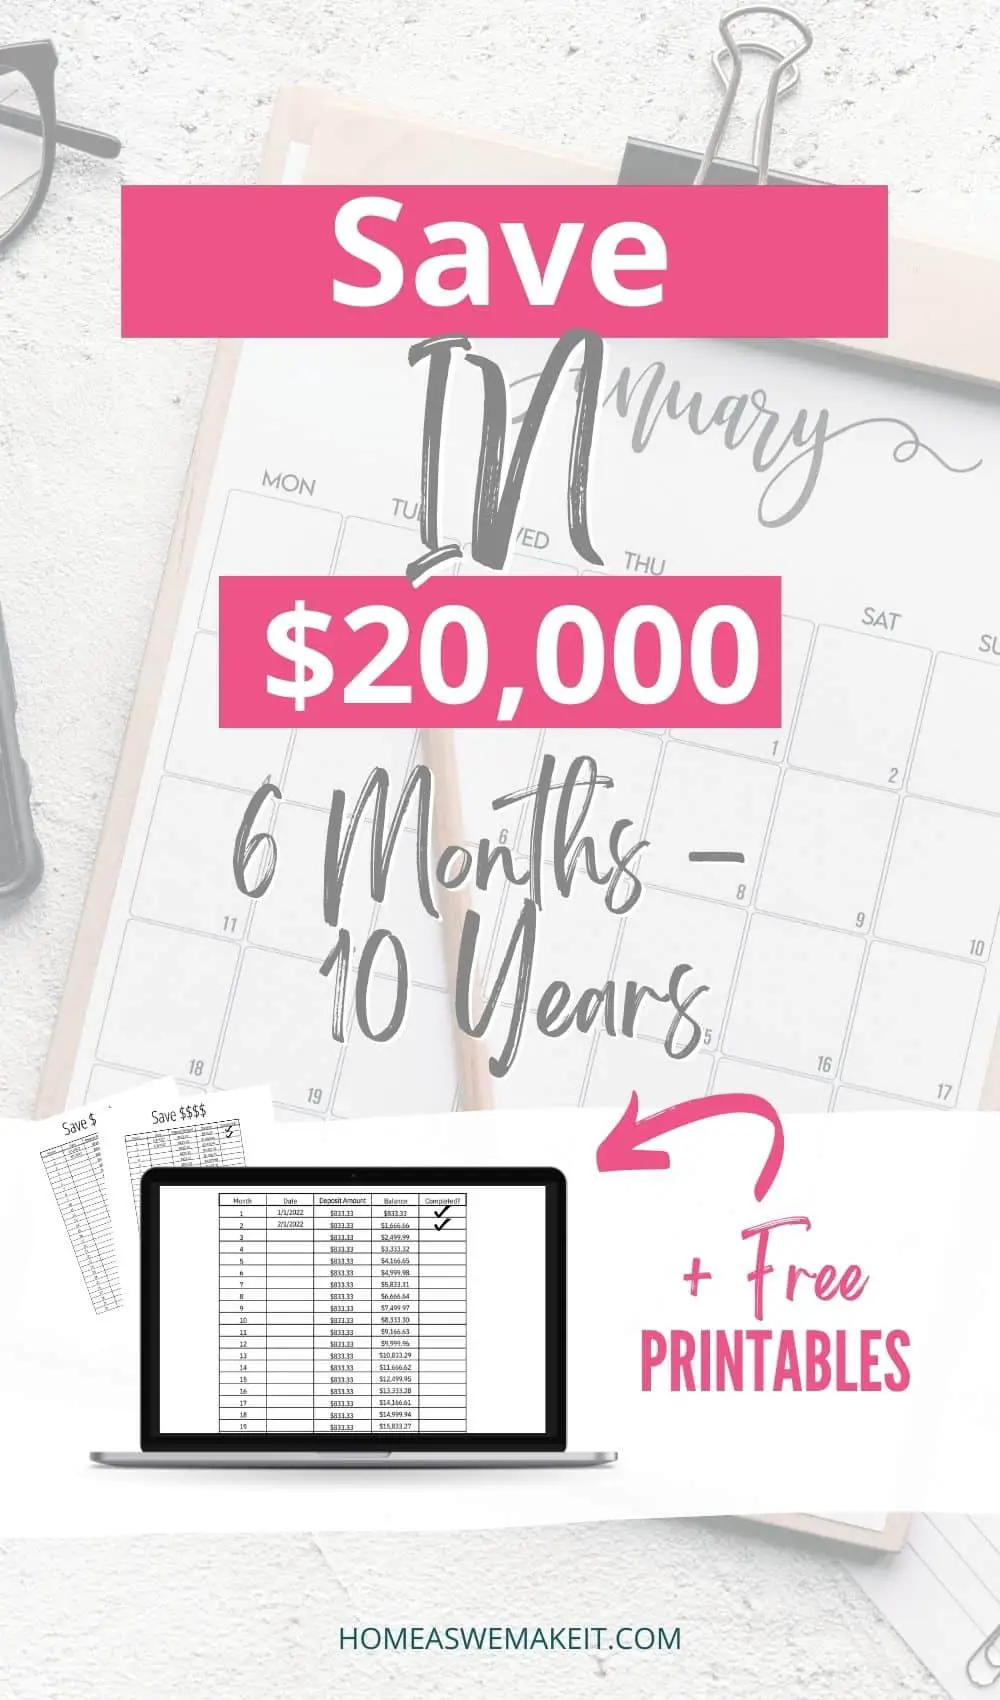 Save $20,000 in 6 months to 1 year with free printable savings trackers